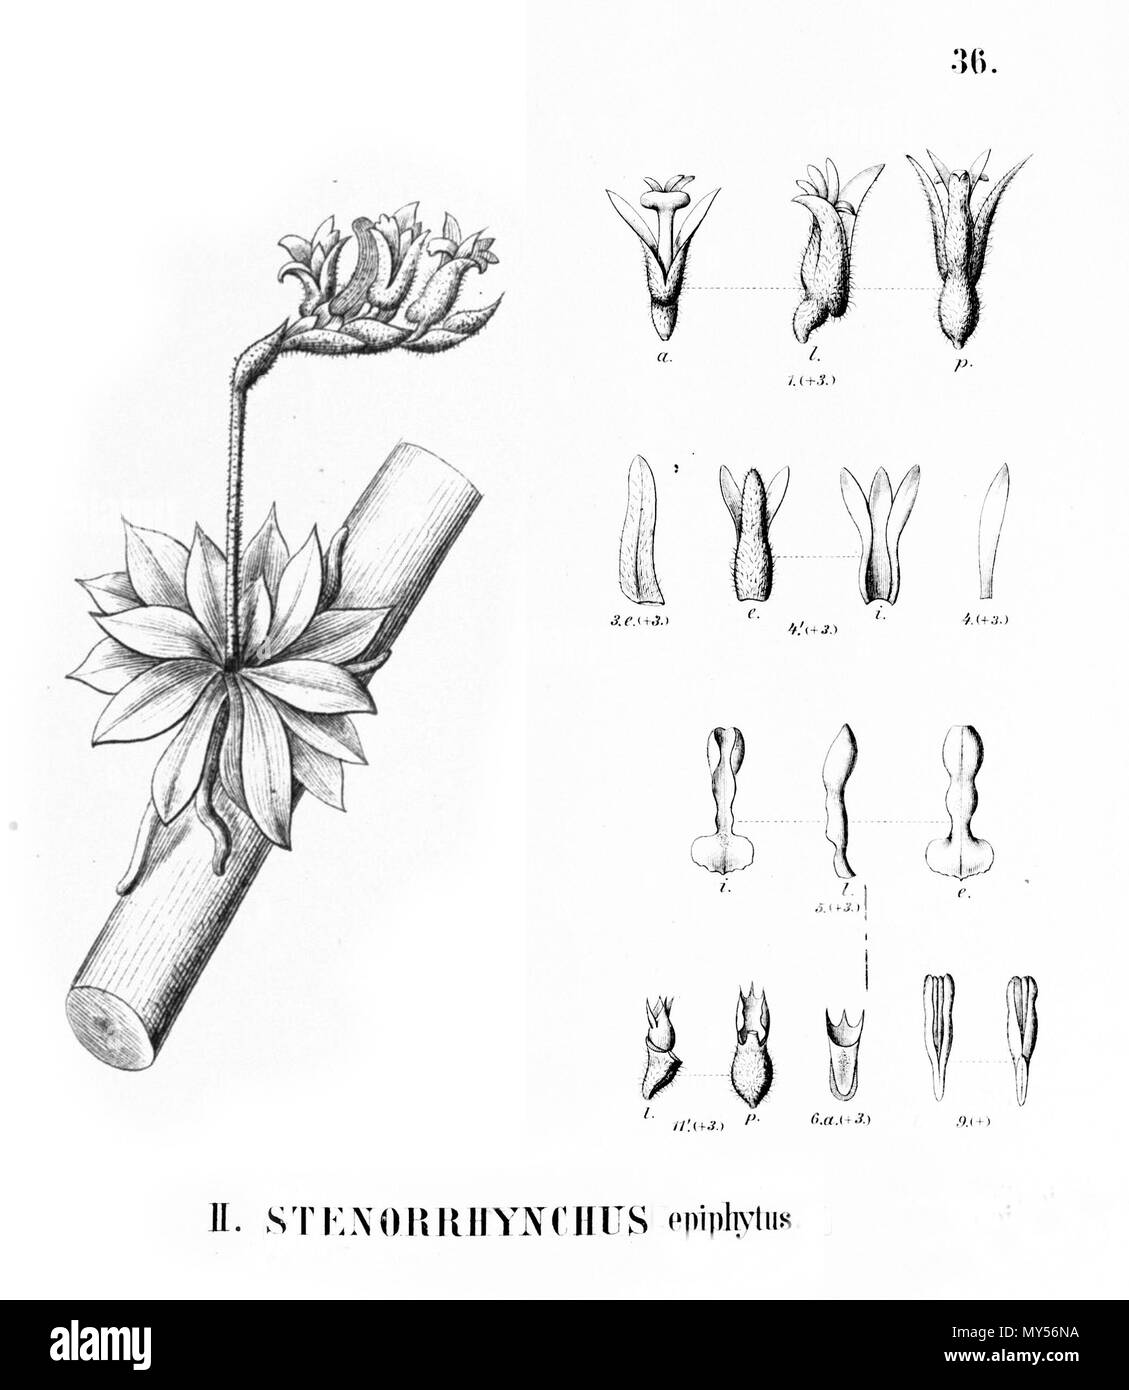 . Illustration of Lankesterella caespitosa (as syn. Stenorrhynchos epiphytum, spelled by Cogniaux as Stenorrhynchus epiphytus) . 1895. Alfred Cogniaux (1841 - 1916) 313 Lankesterella caespitosa (as syn. Stenorrhynchos epiphytum) - cutout from Flora Brasiliensis 3-4-36-fig II Stock Photo